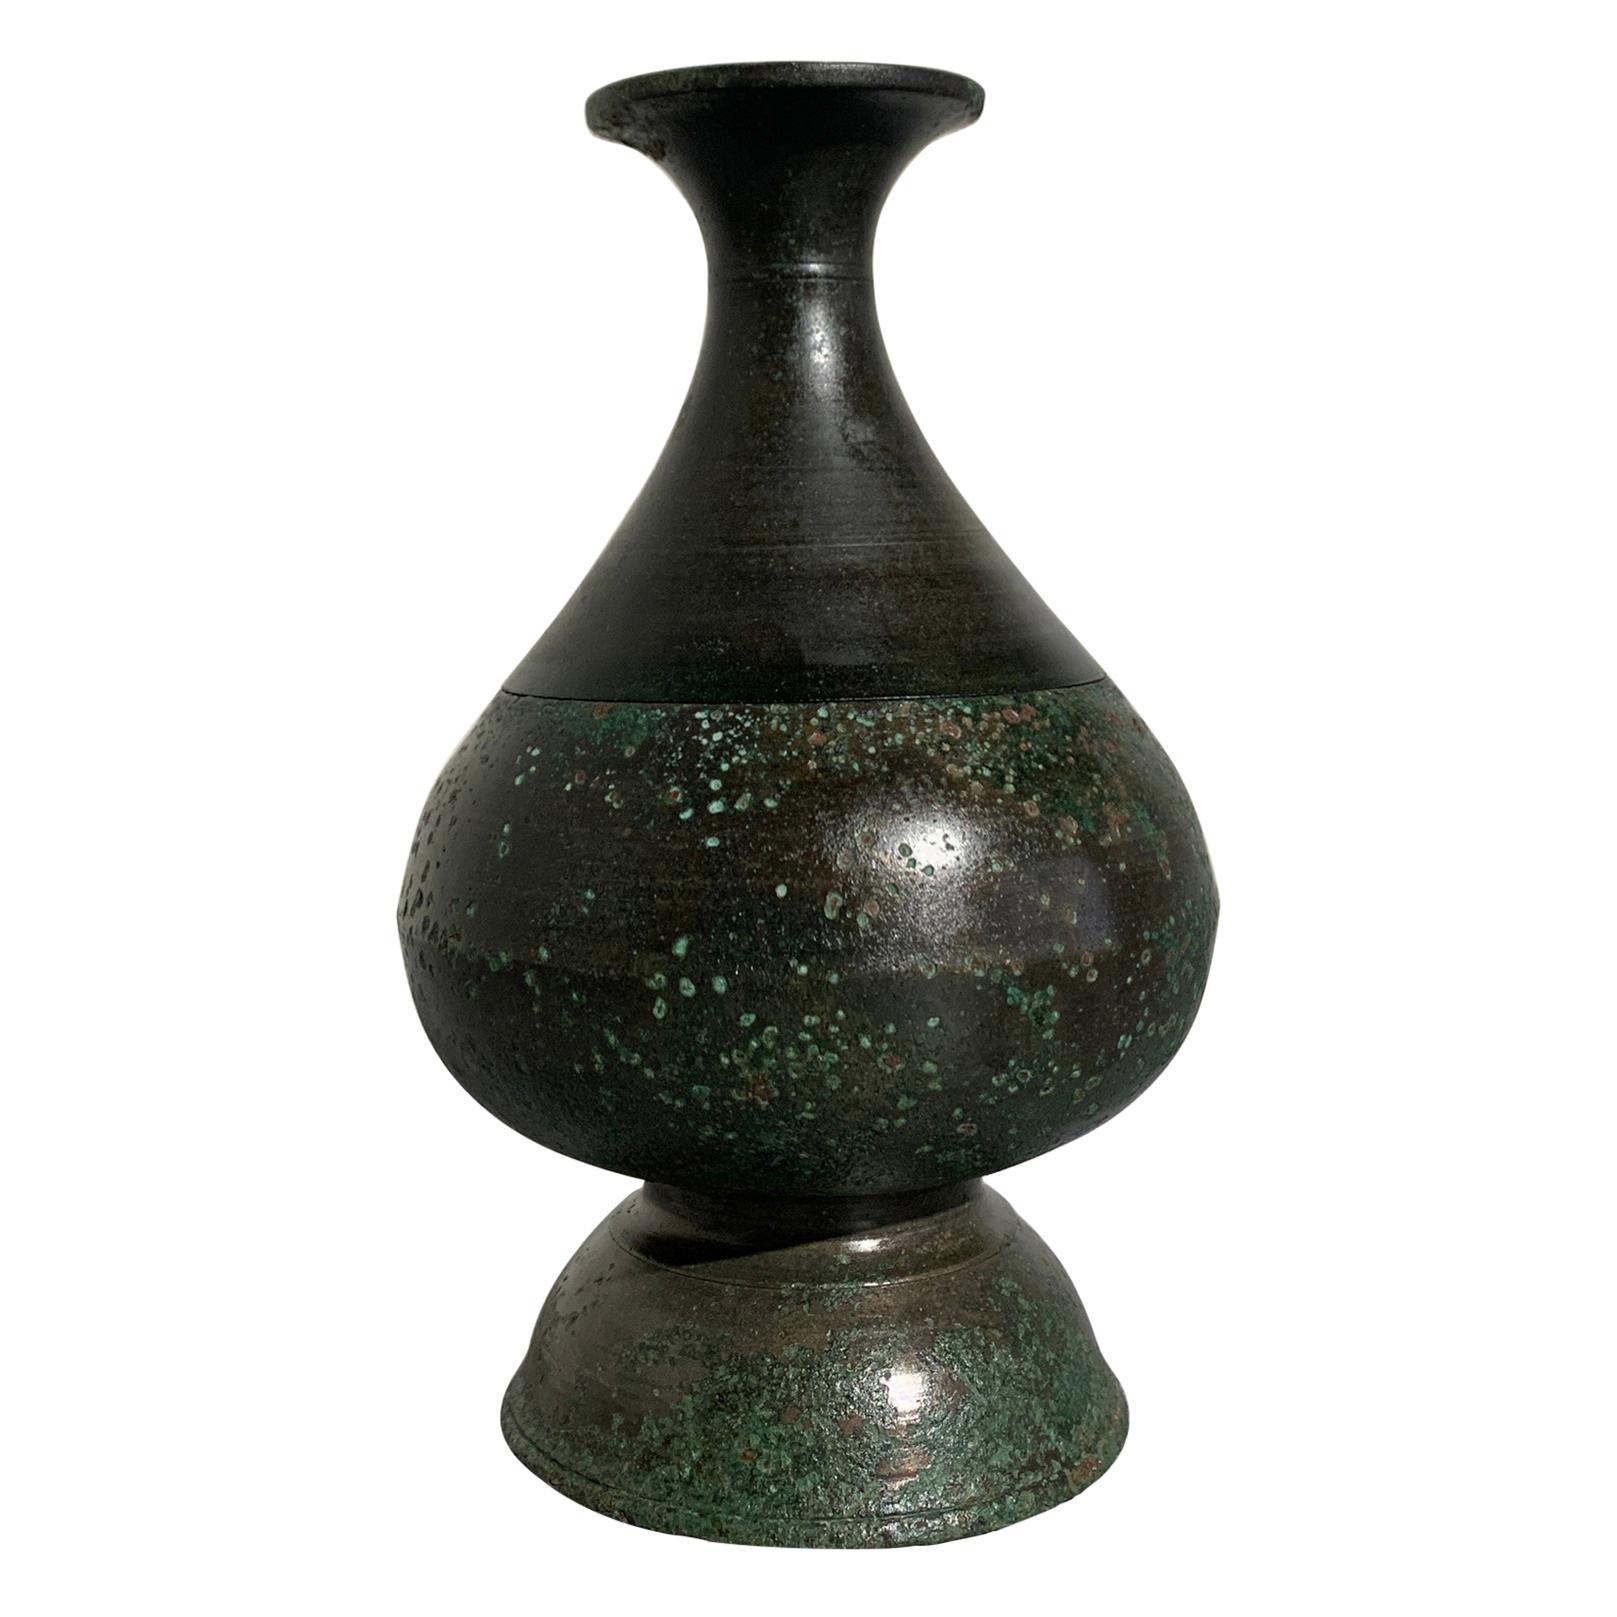 Khmer Bronze Two Part Bottle Vase, Angkor Period, 12th-14th Century